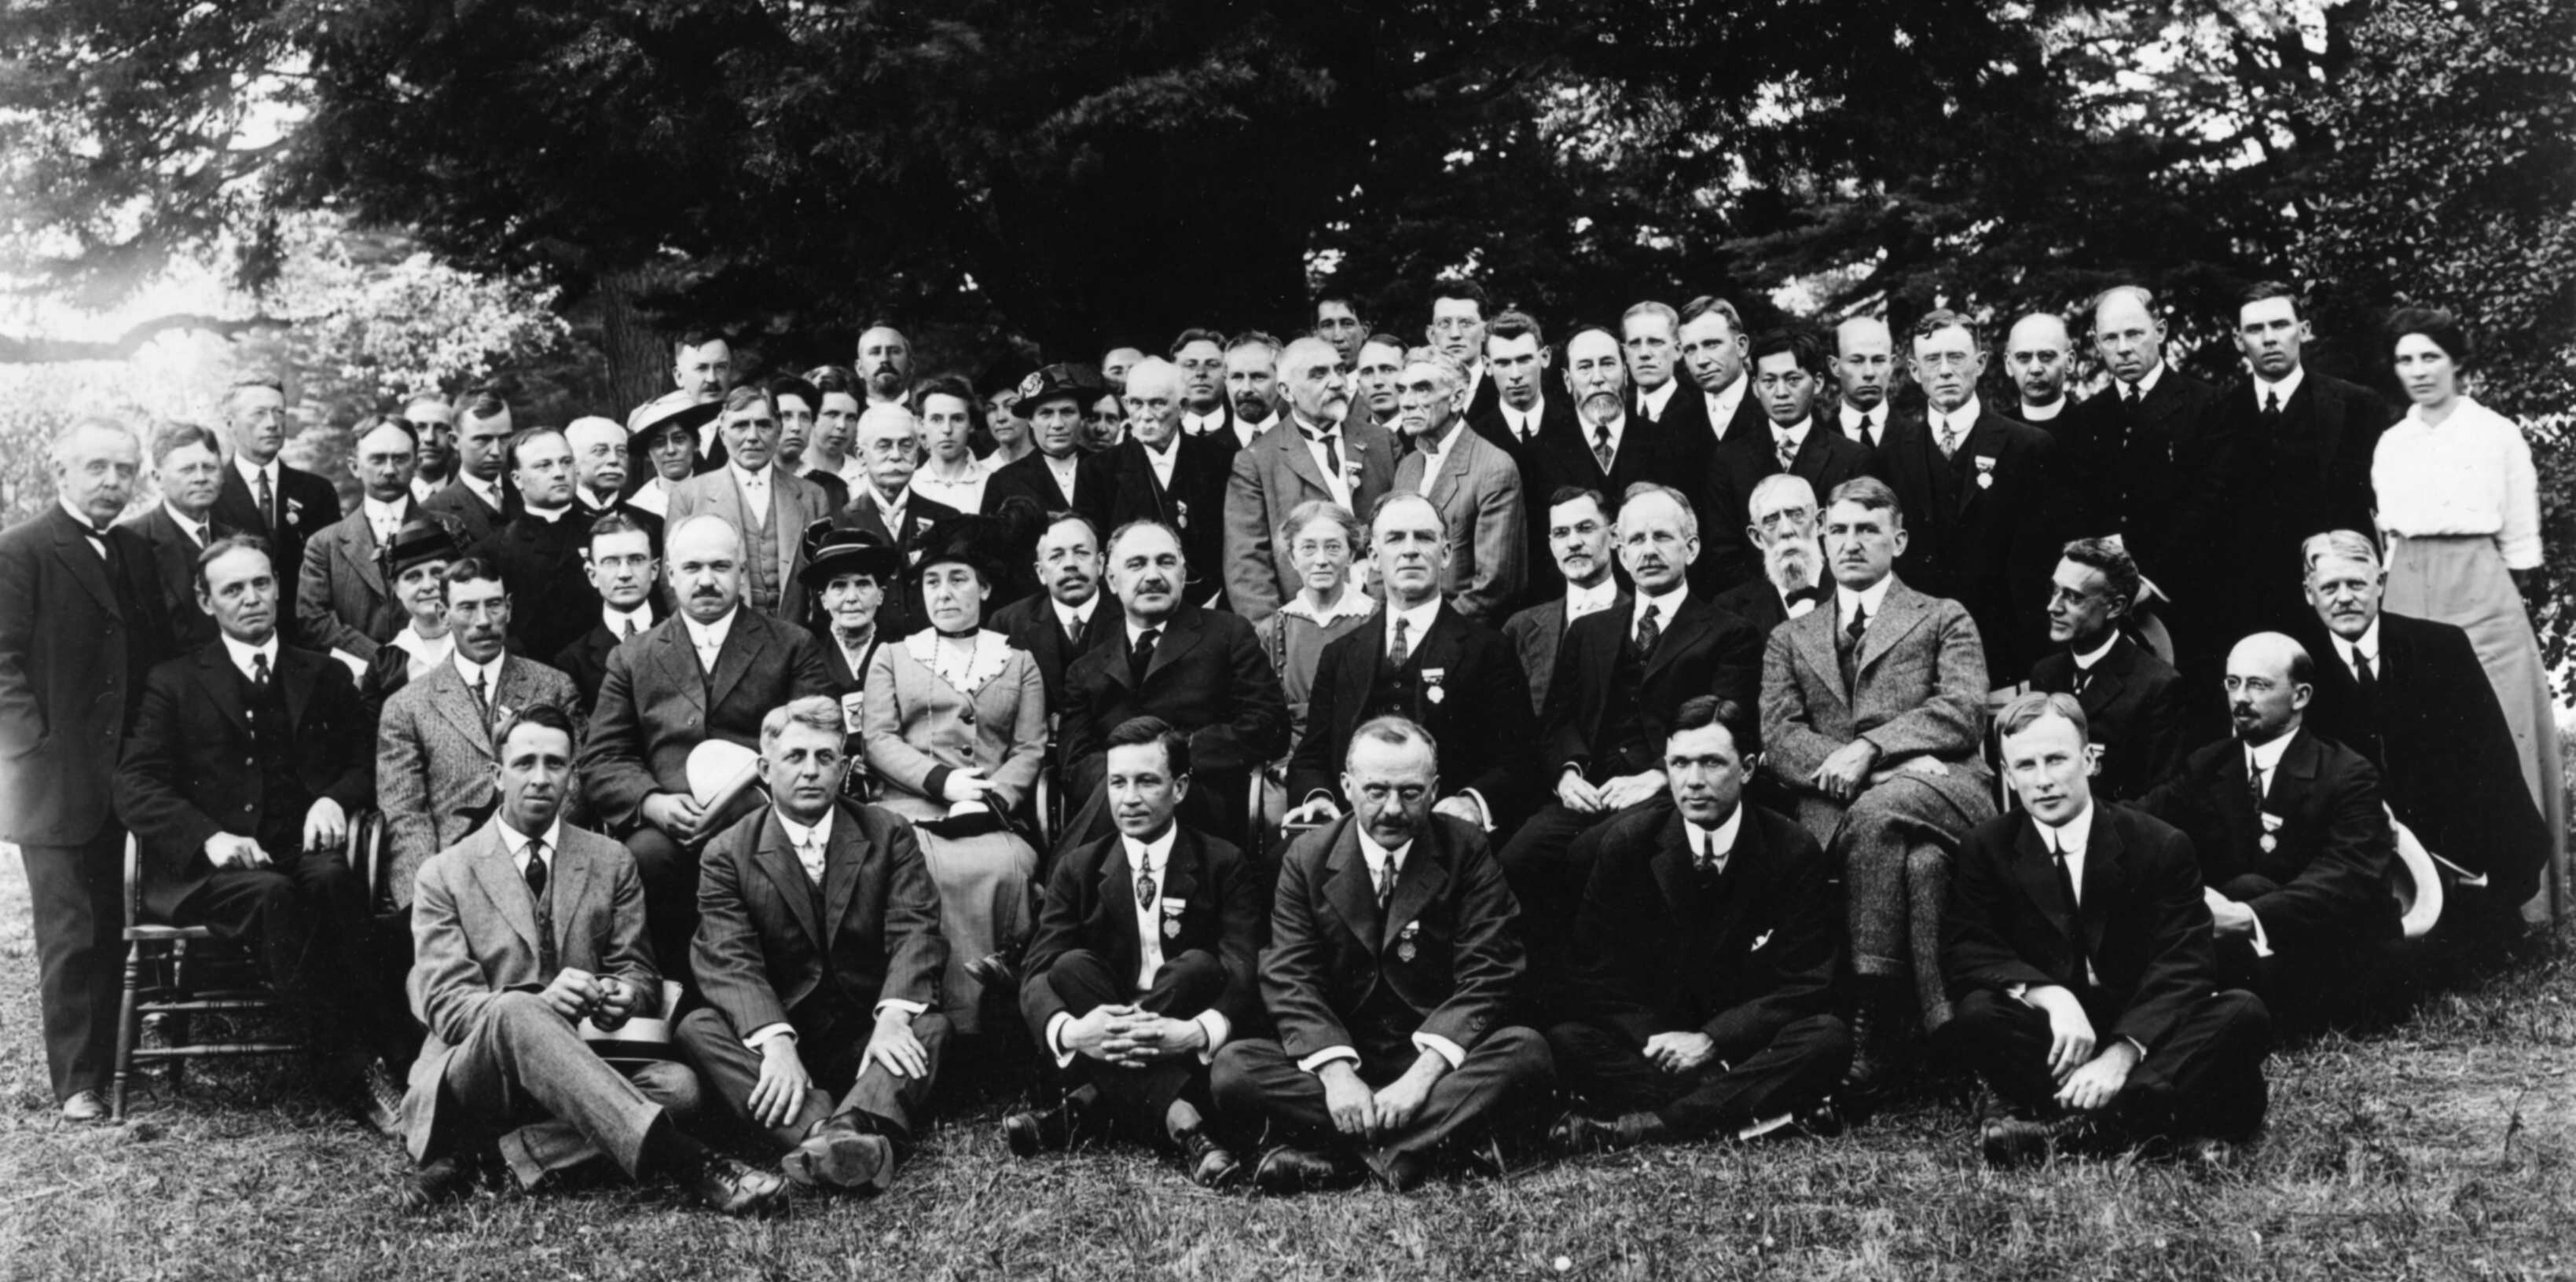 A group of formally dressed people, mostly men with a few women, posing outdoors for a historical group photo.